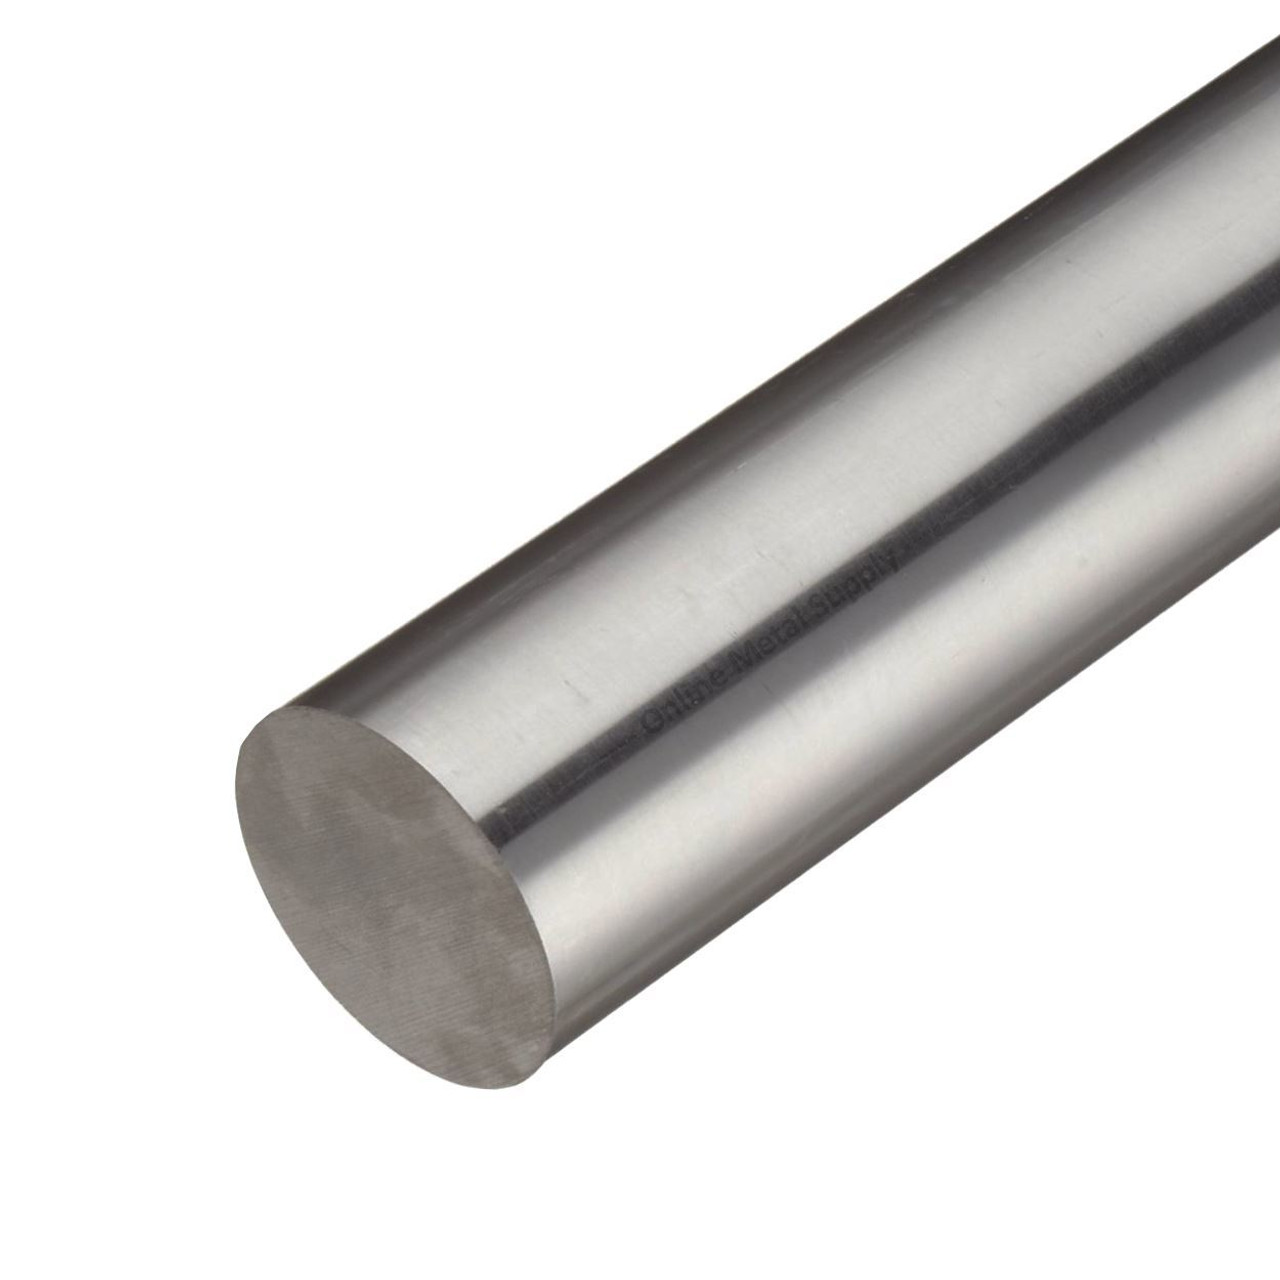 0.492 (12.5 mm) x 18 inches, 303 Stainless Steel Round Rod, Cold Finished